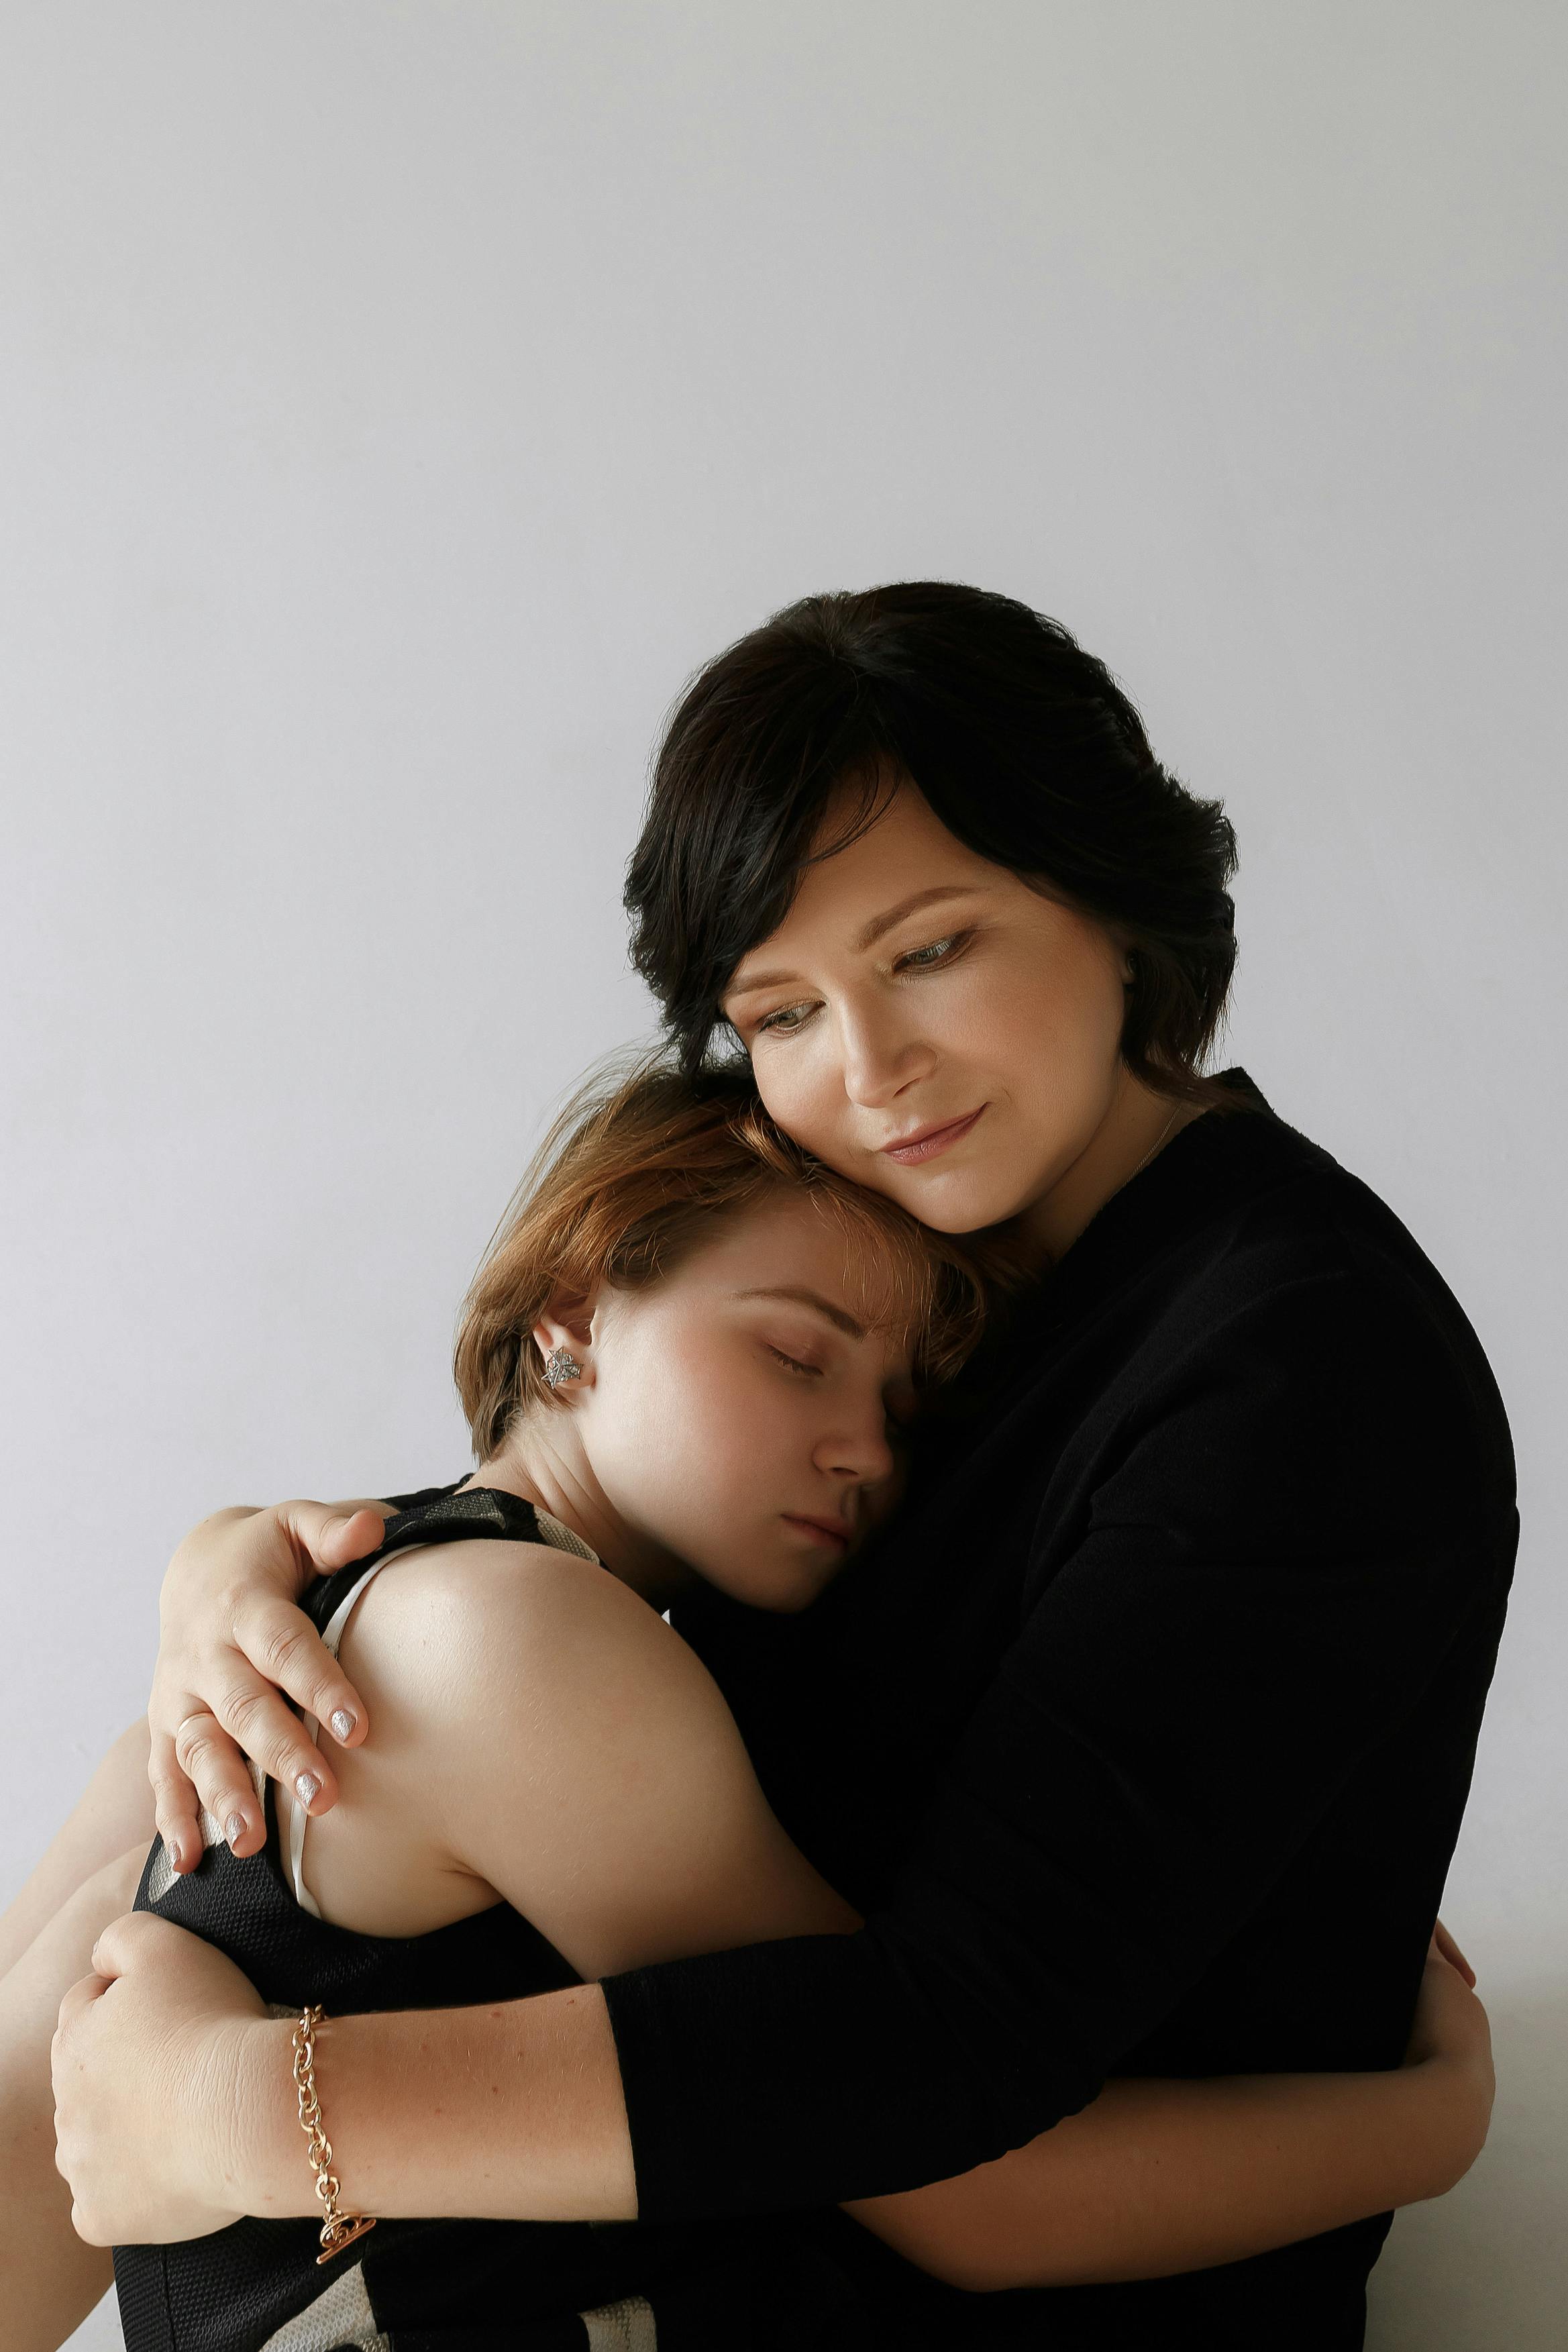 A mother and her daughter embracing each other | Source: Pexels